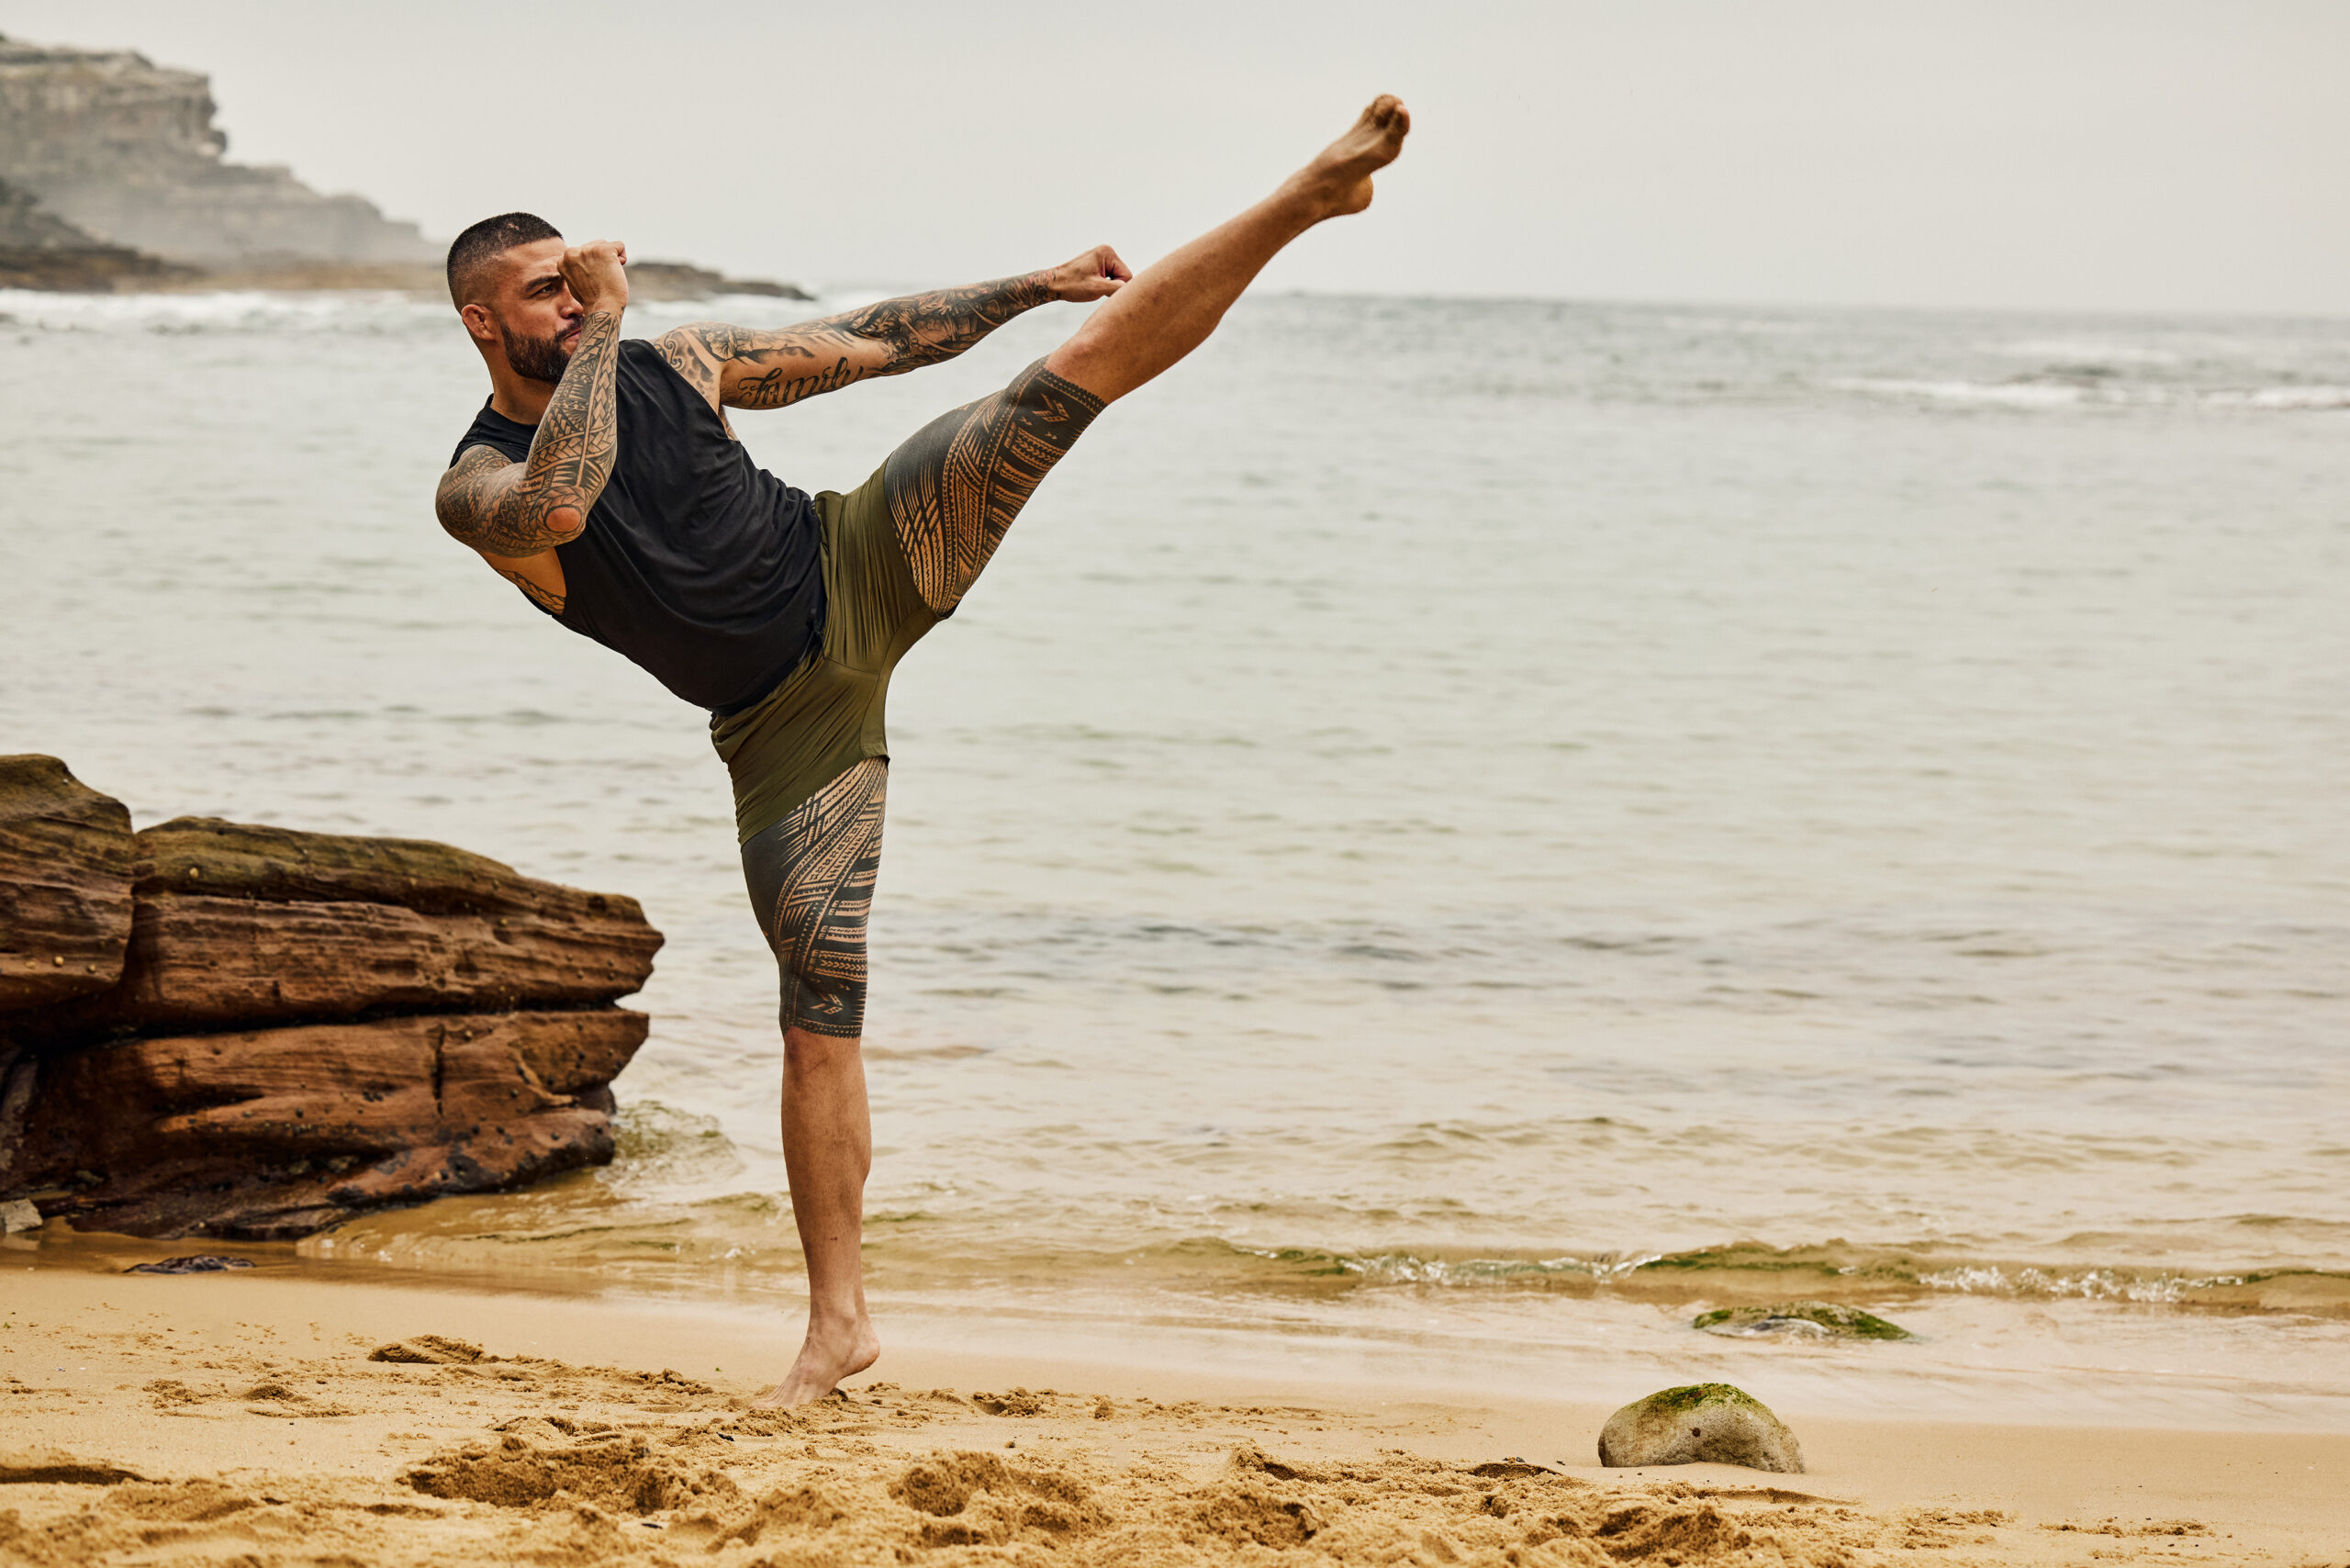 Tyson Pedro and the search for your best self